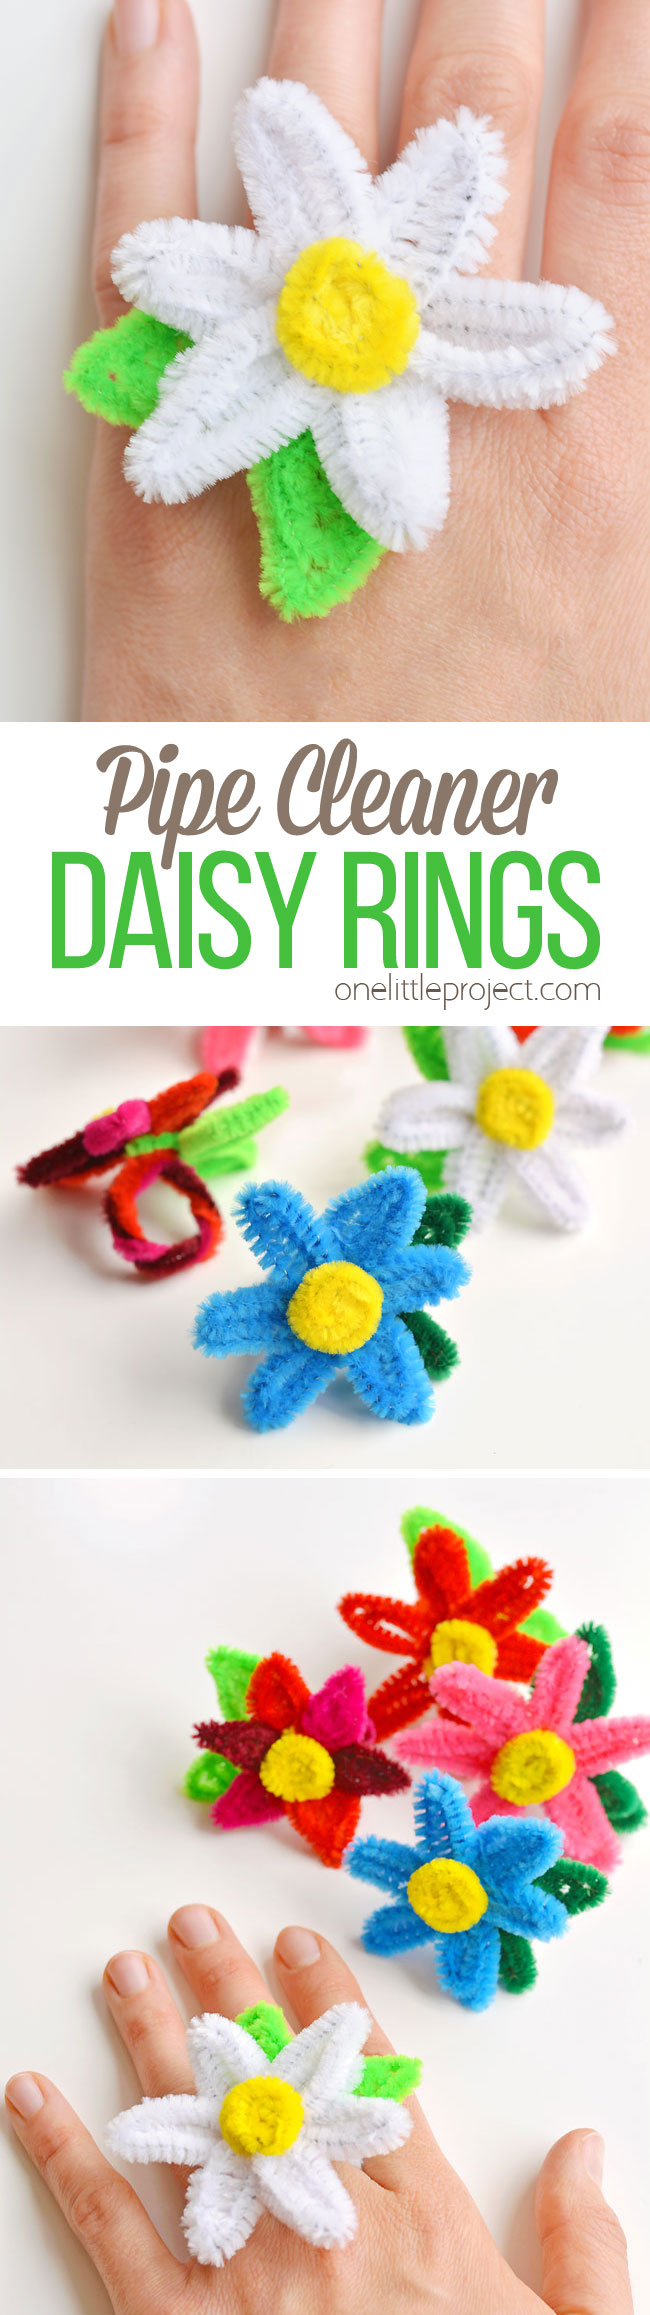 These pipe cleaner daisy rings are so fun and they're really easy to make! This is such a fun summer craft idea and a great craft for kids, teens, tweens and even adults. Each one takes less than 5 minutes to make and you only need pipe cleaners! Such a great way to make homemade jewelry.